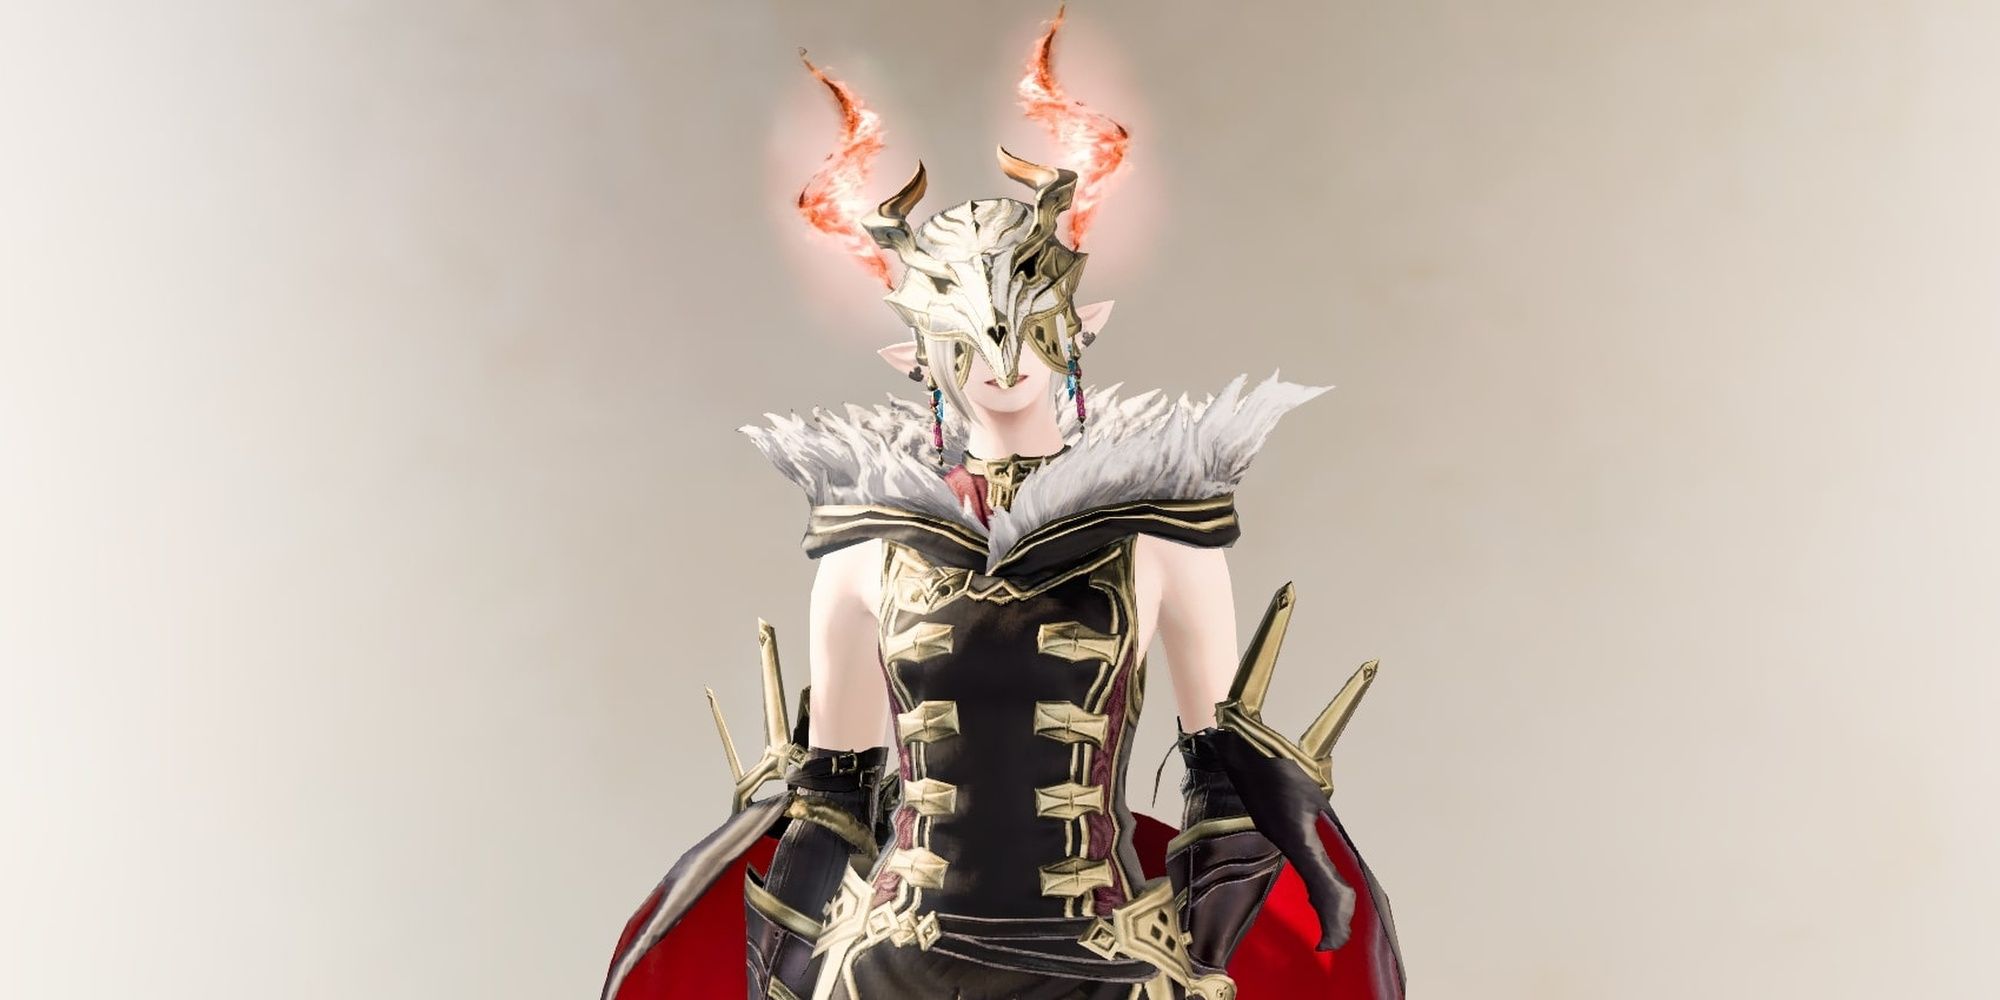 Final Fantasy 14 Elezen Character in Bonewicca Glamour Against an Off-White Background